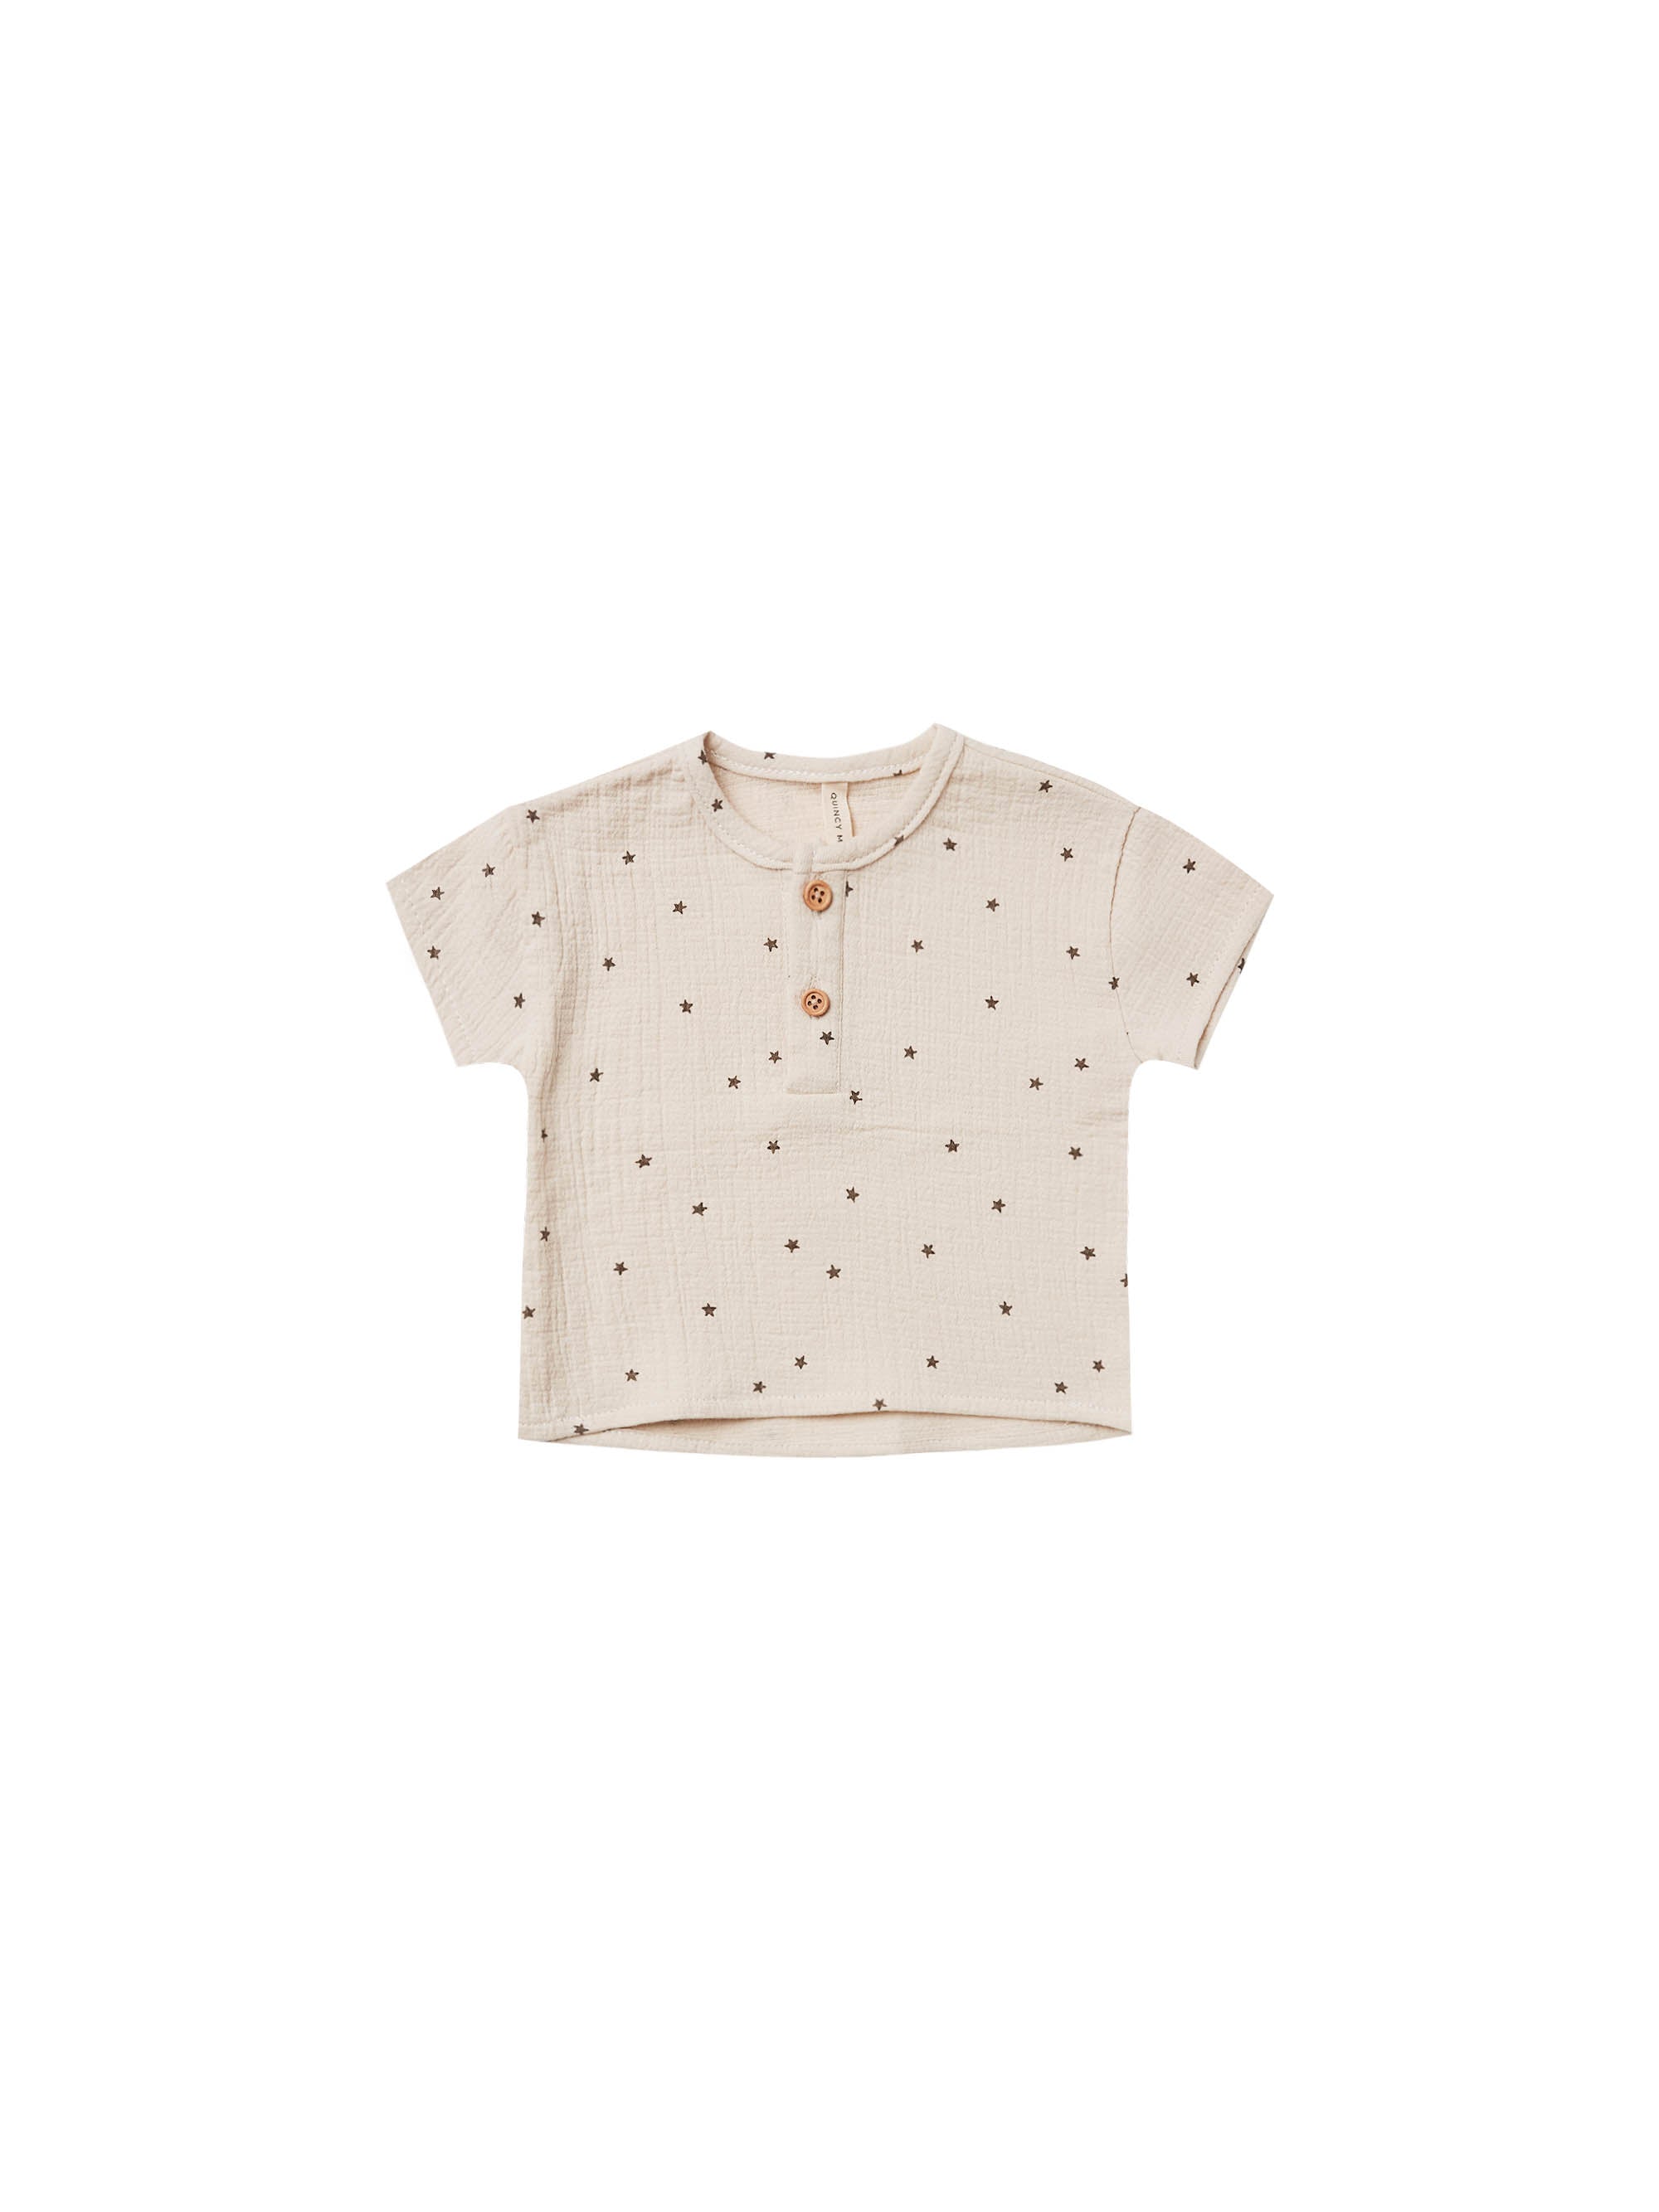 Quincy Mae Woven Henry Top - Natural